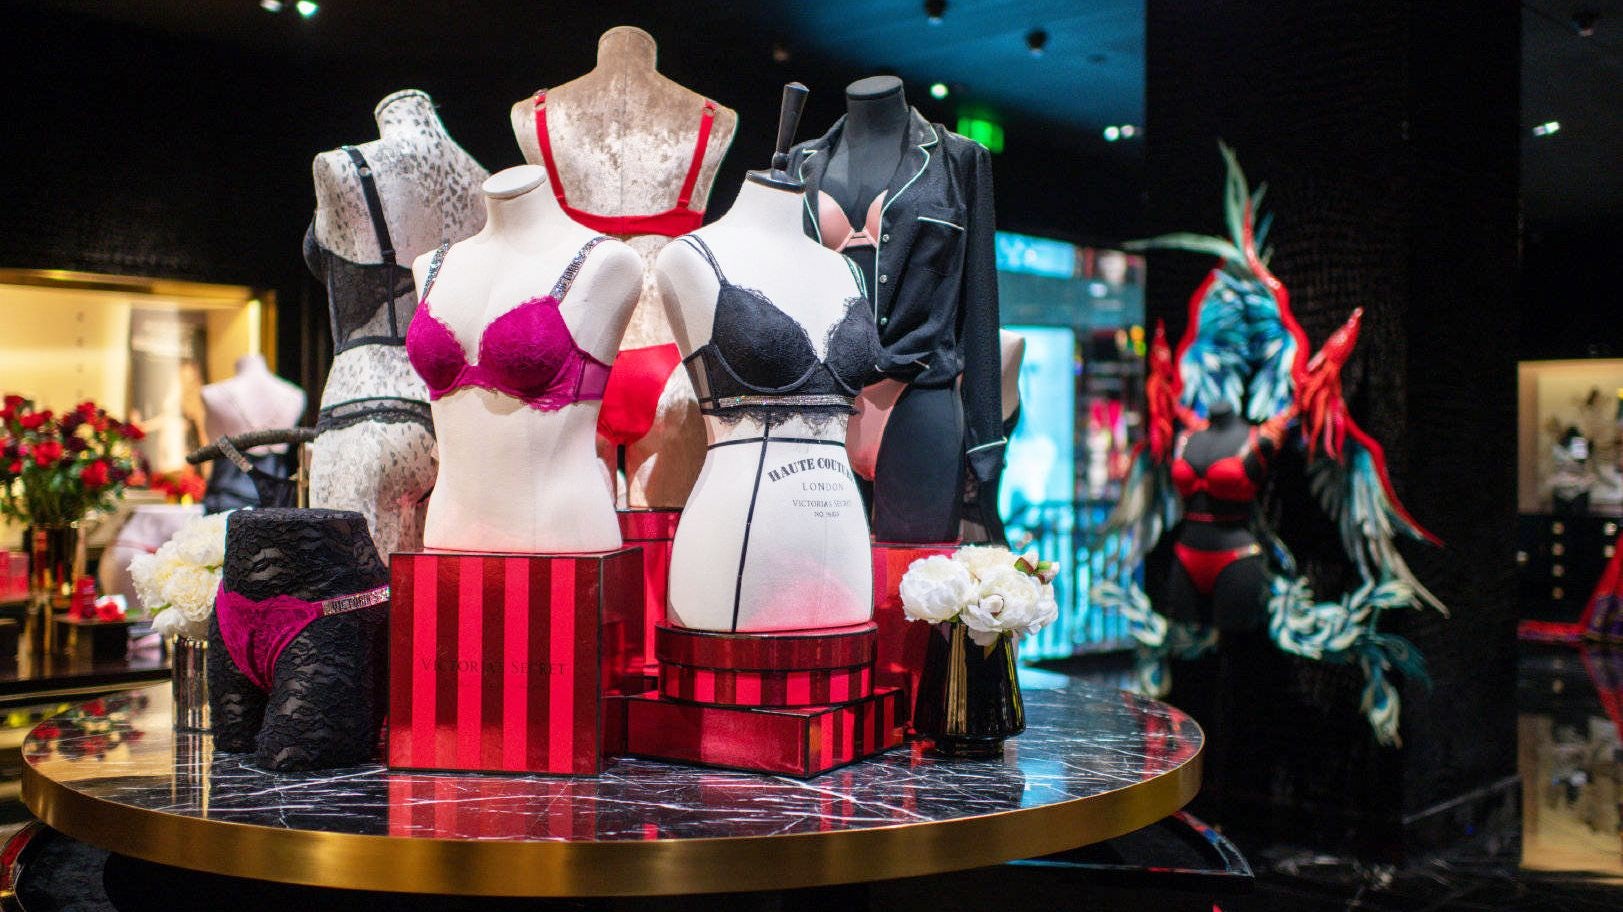 Why Victoria’s Secret Body Positivity Spin Won’t Work in China